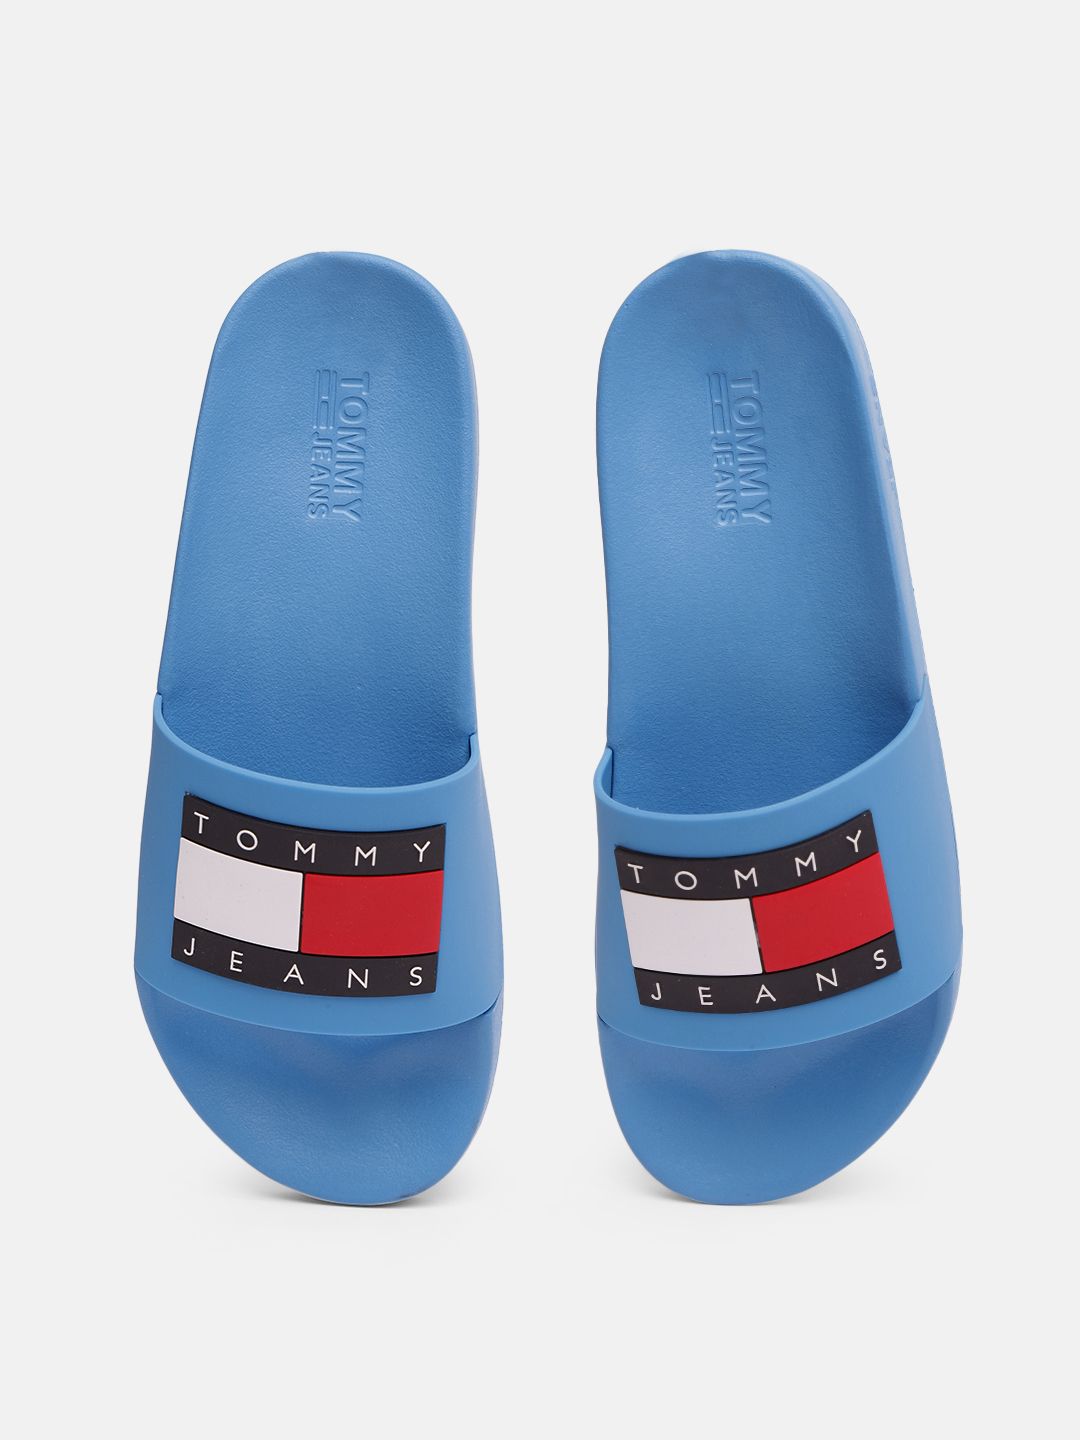 Tommy Hilfiger Women Blue Brand Logo Printed Sliders Price in India